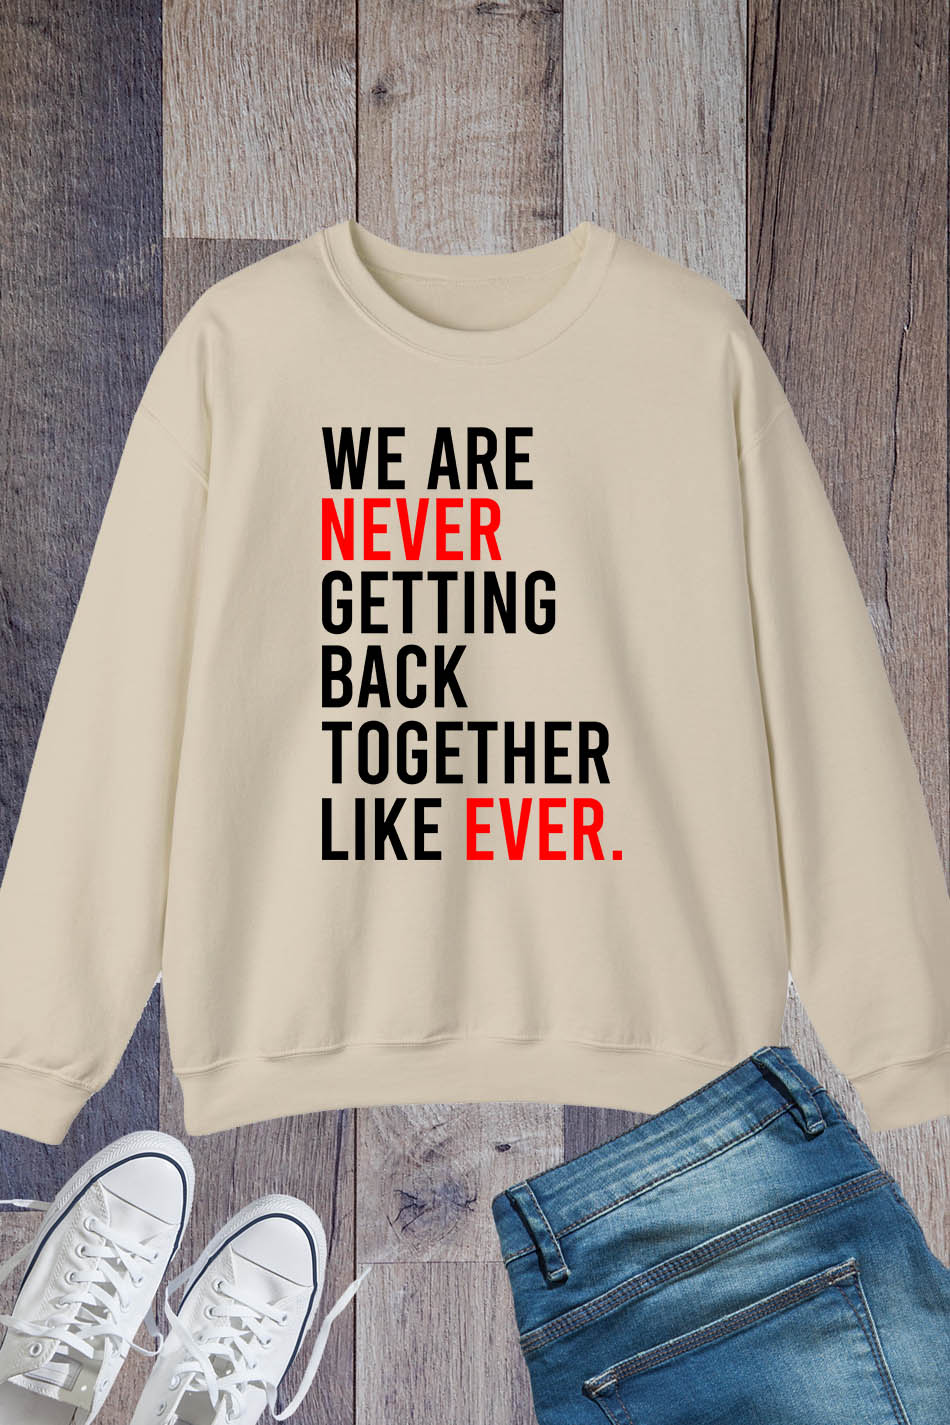 We are Never Getting BackTogether Like Ever Trendy Retro Sweatshirts